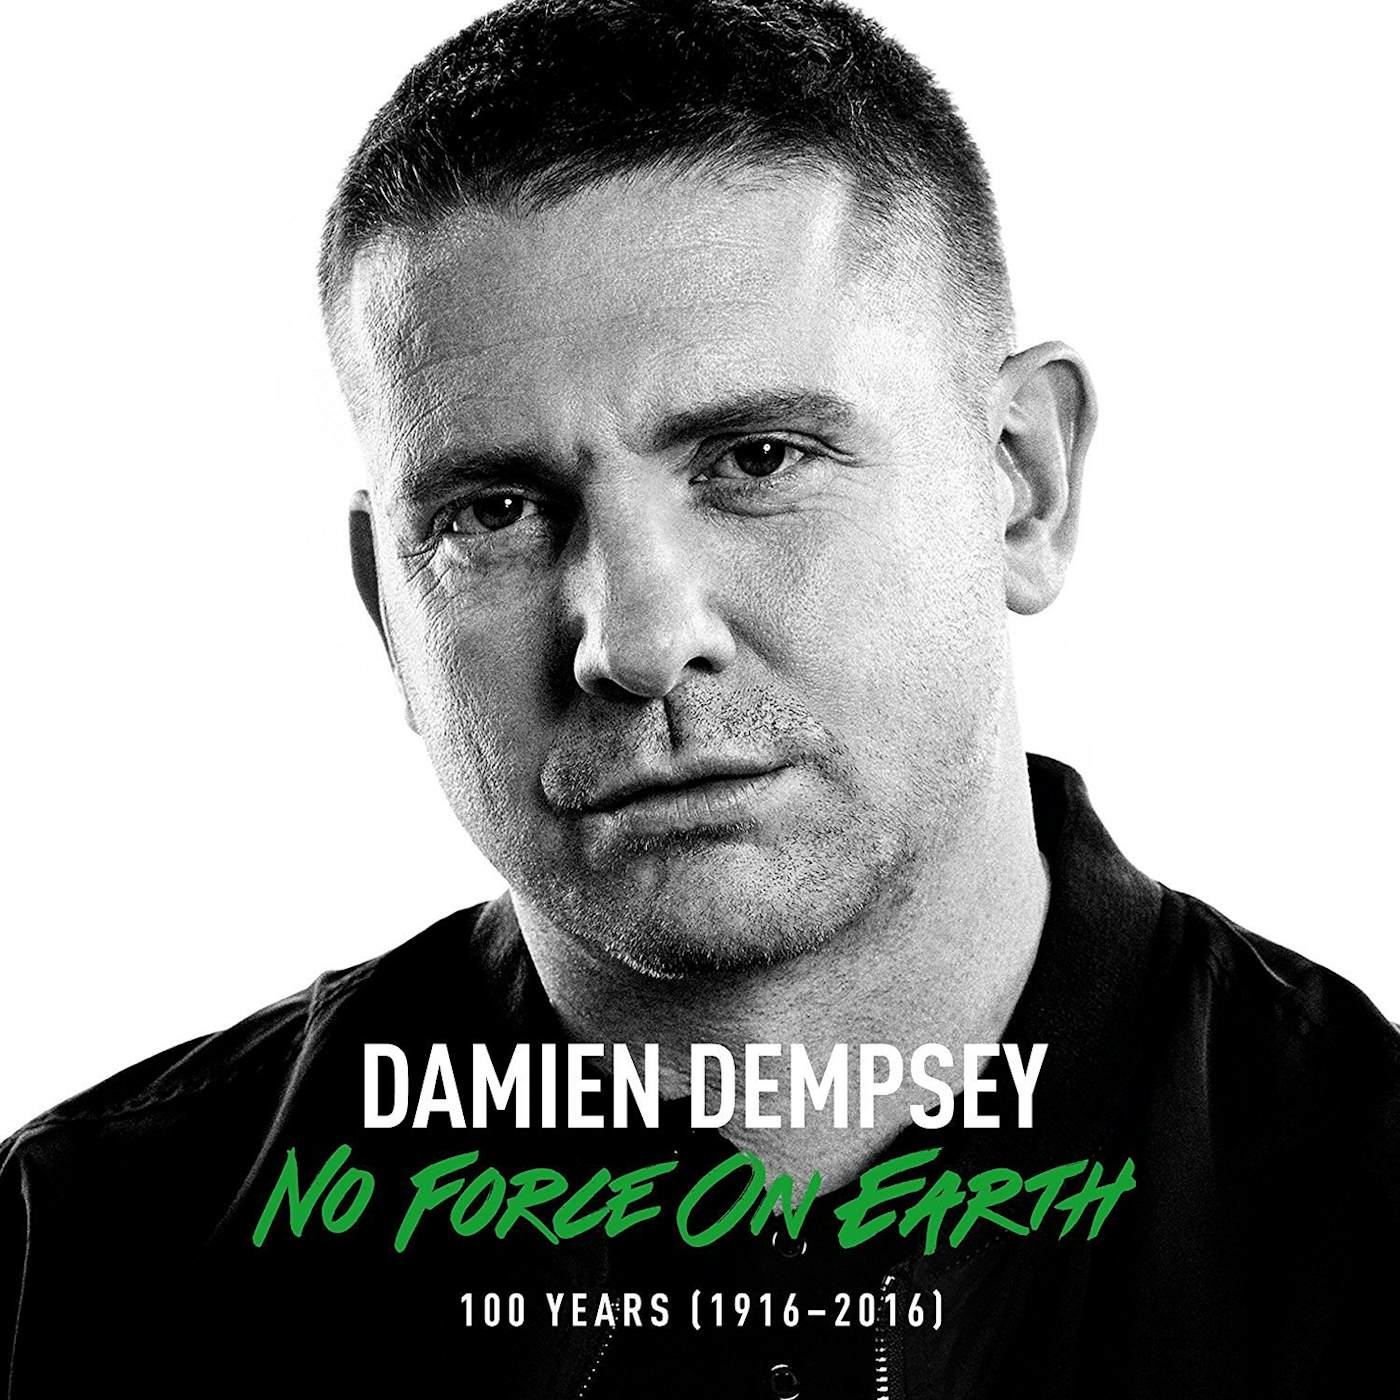 Damien Dempsey NO FORCE ON EARTH CD